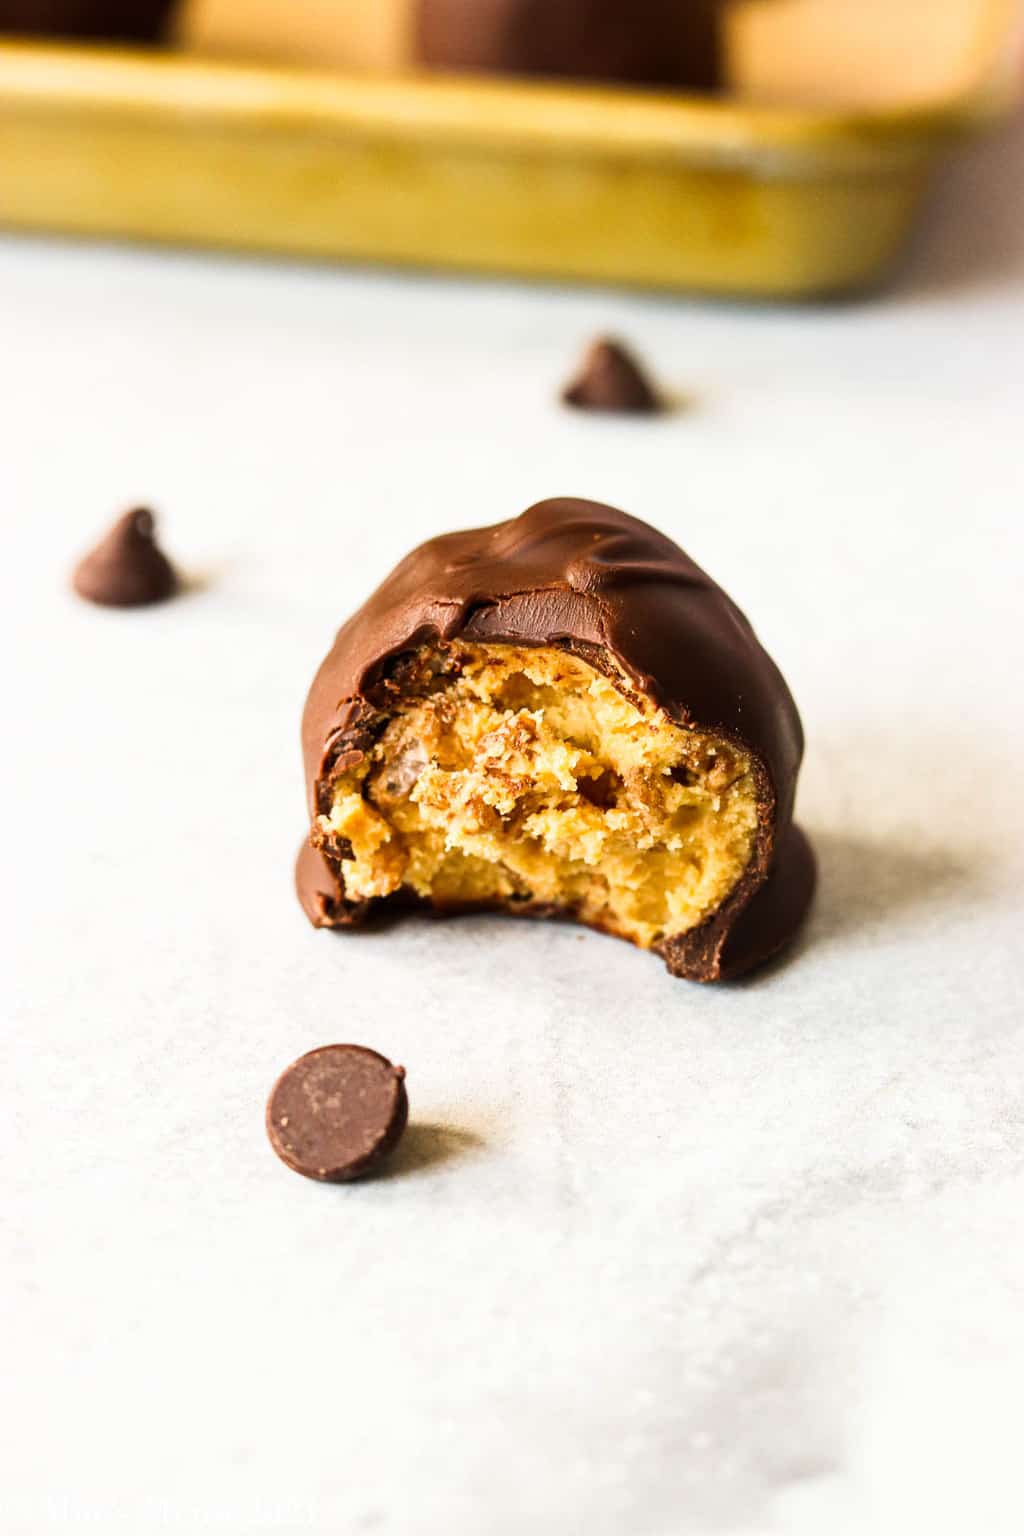 An up-close side shot of a peanut butter bon bon with a bite taken out of it